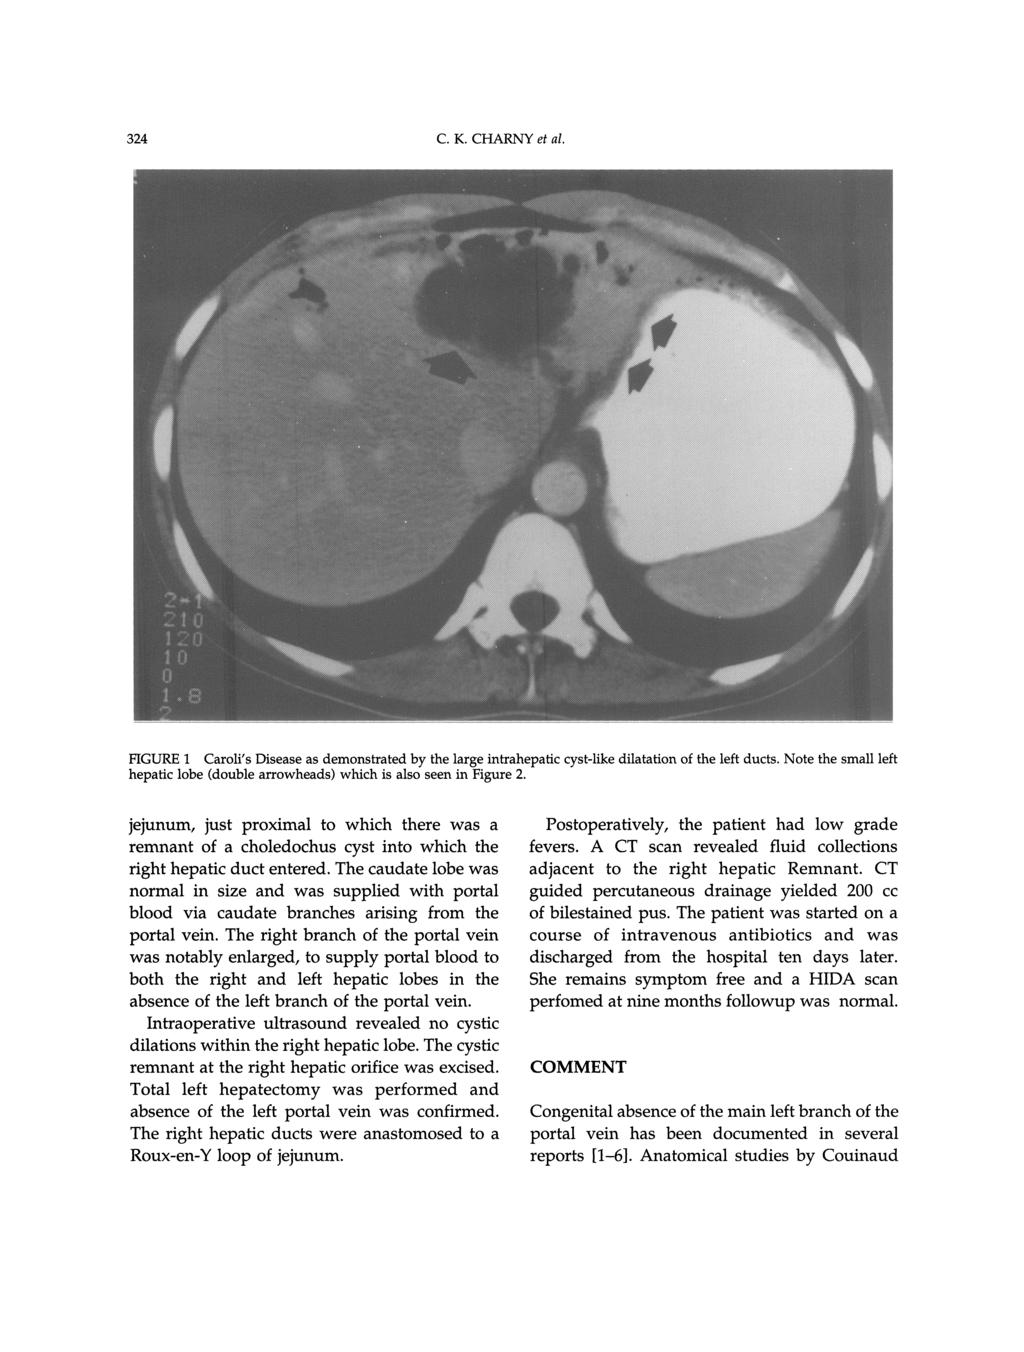 324 C.K. CHARNY et al. FIGURE 1 Caroli s Disease as demonstrated by the large intrahepatic cyst-like dilatation of the left ducts.